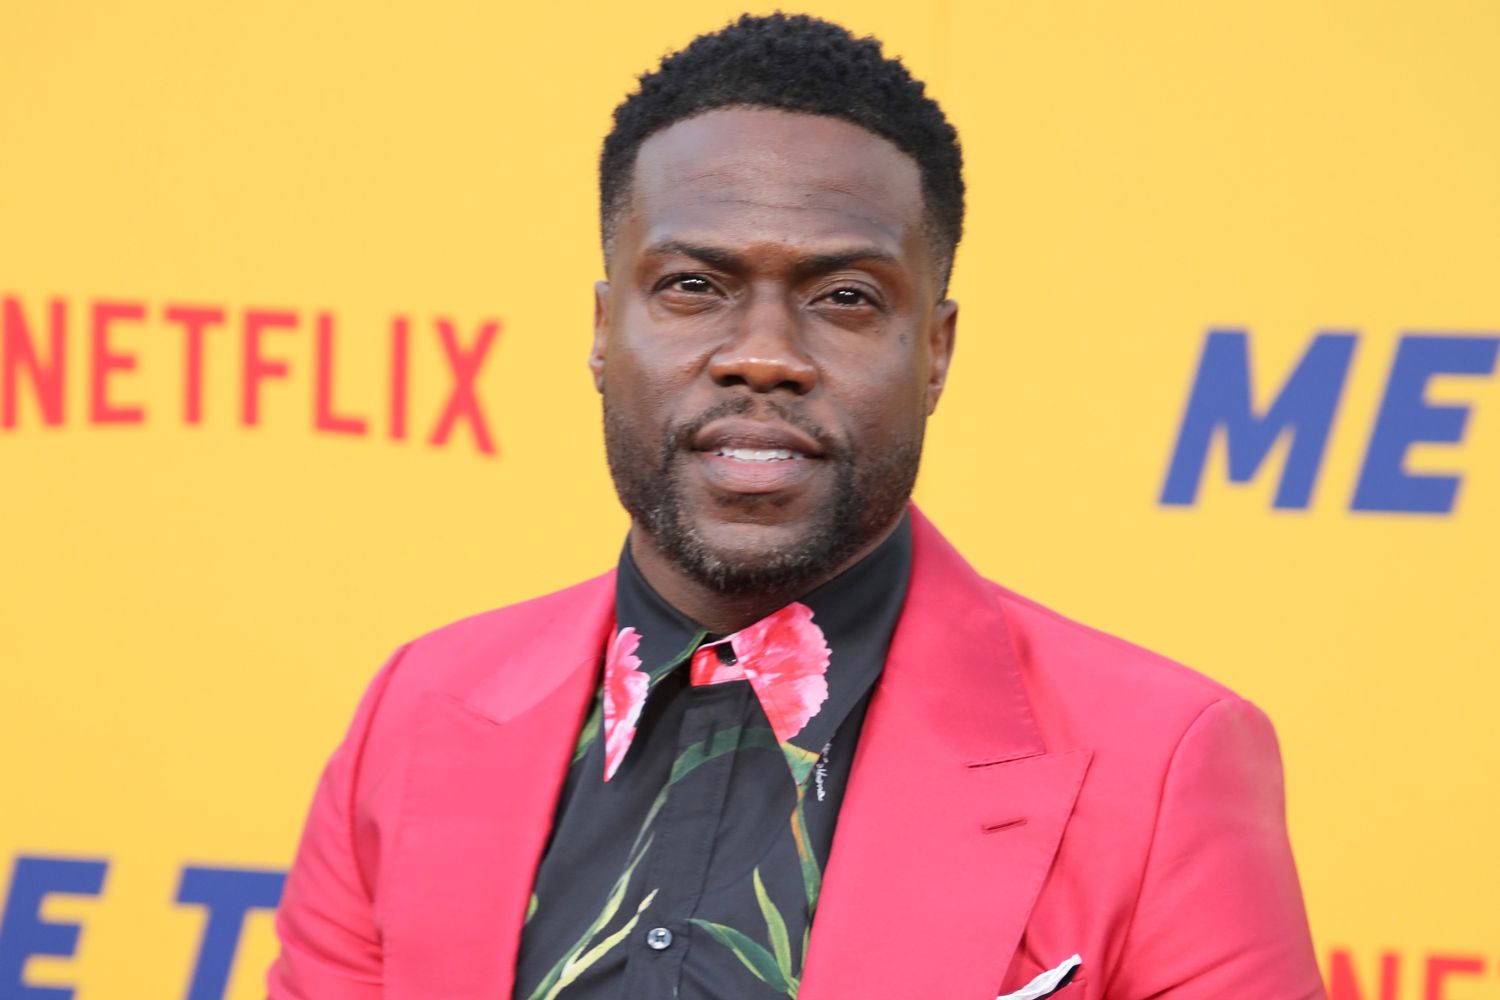 Comedian Kevin Hart attends the premiere of Netflix's 'Me Time' at Regency Village Theatre on Aug. 23, 2022 in Los Angeles